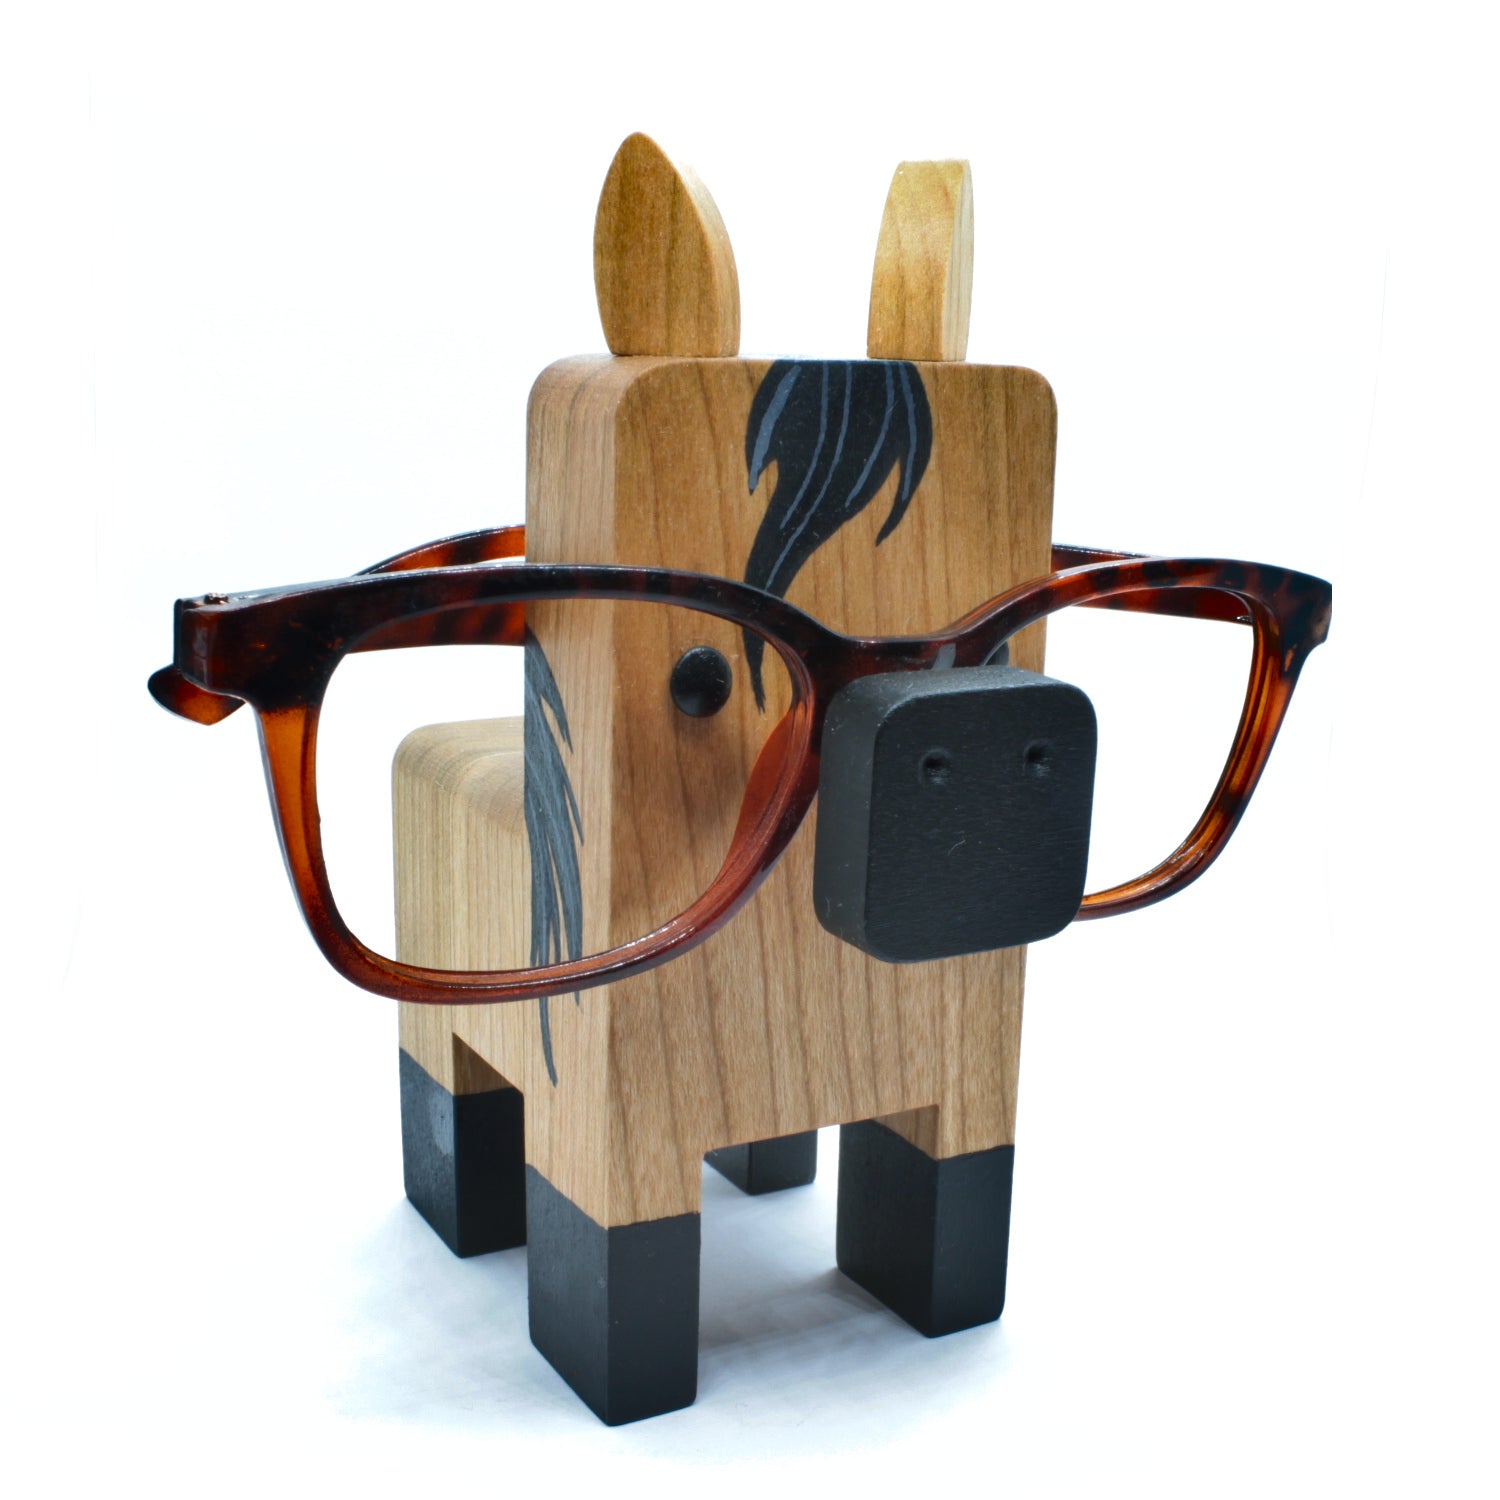 Handcrafted Horse Eyeglass Holder - Wood - Stable and Functional - ApolloBox